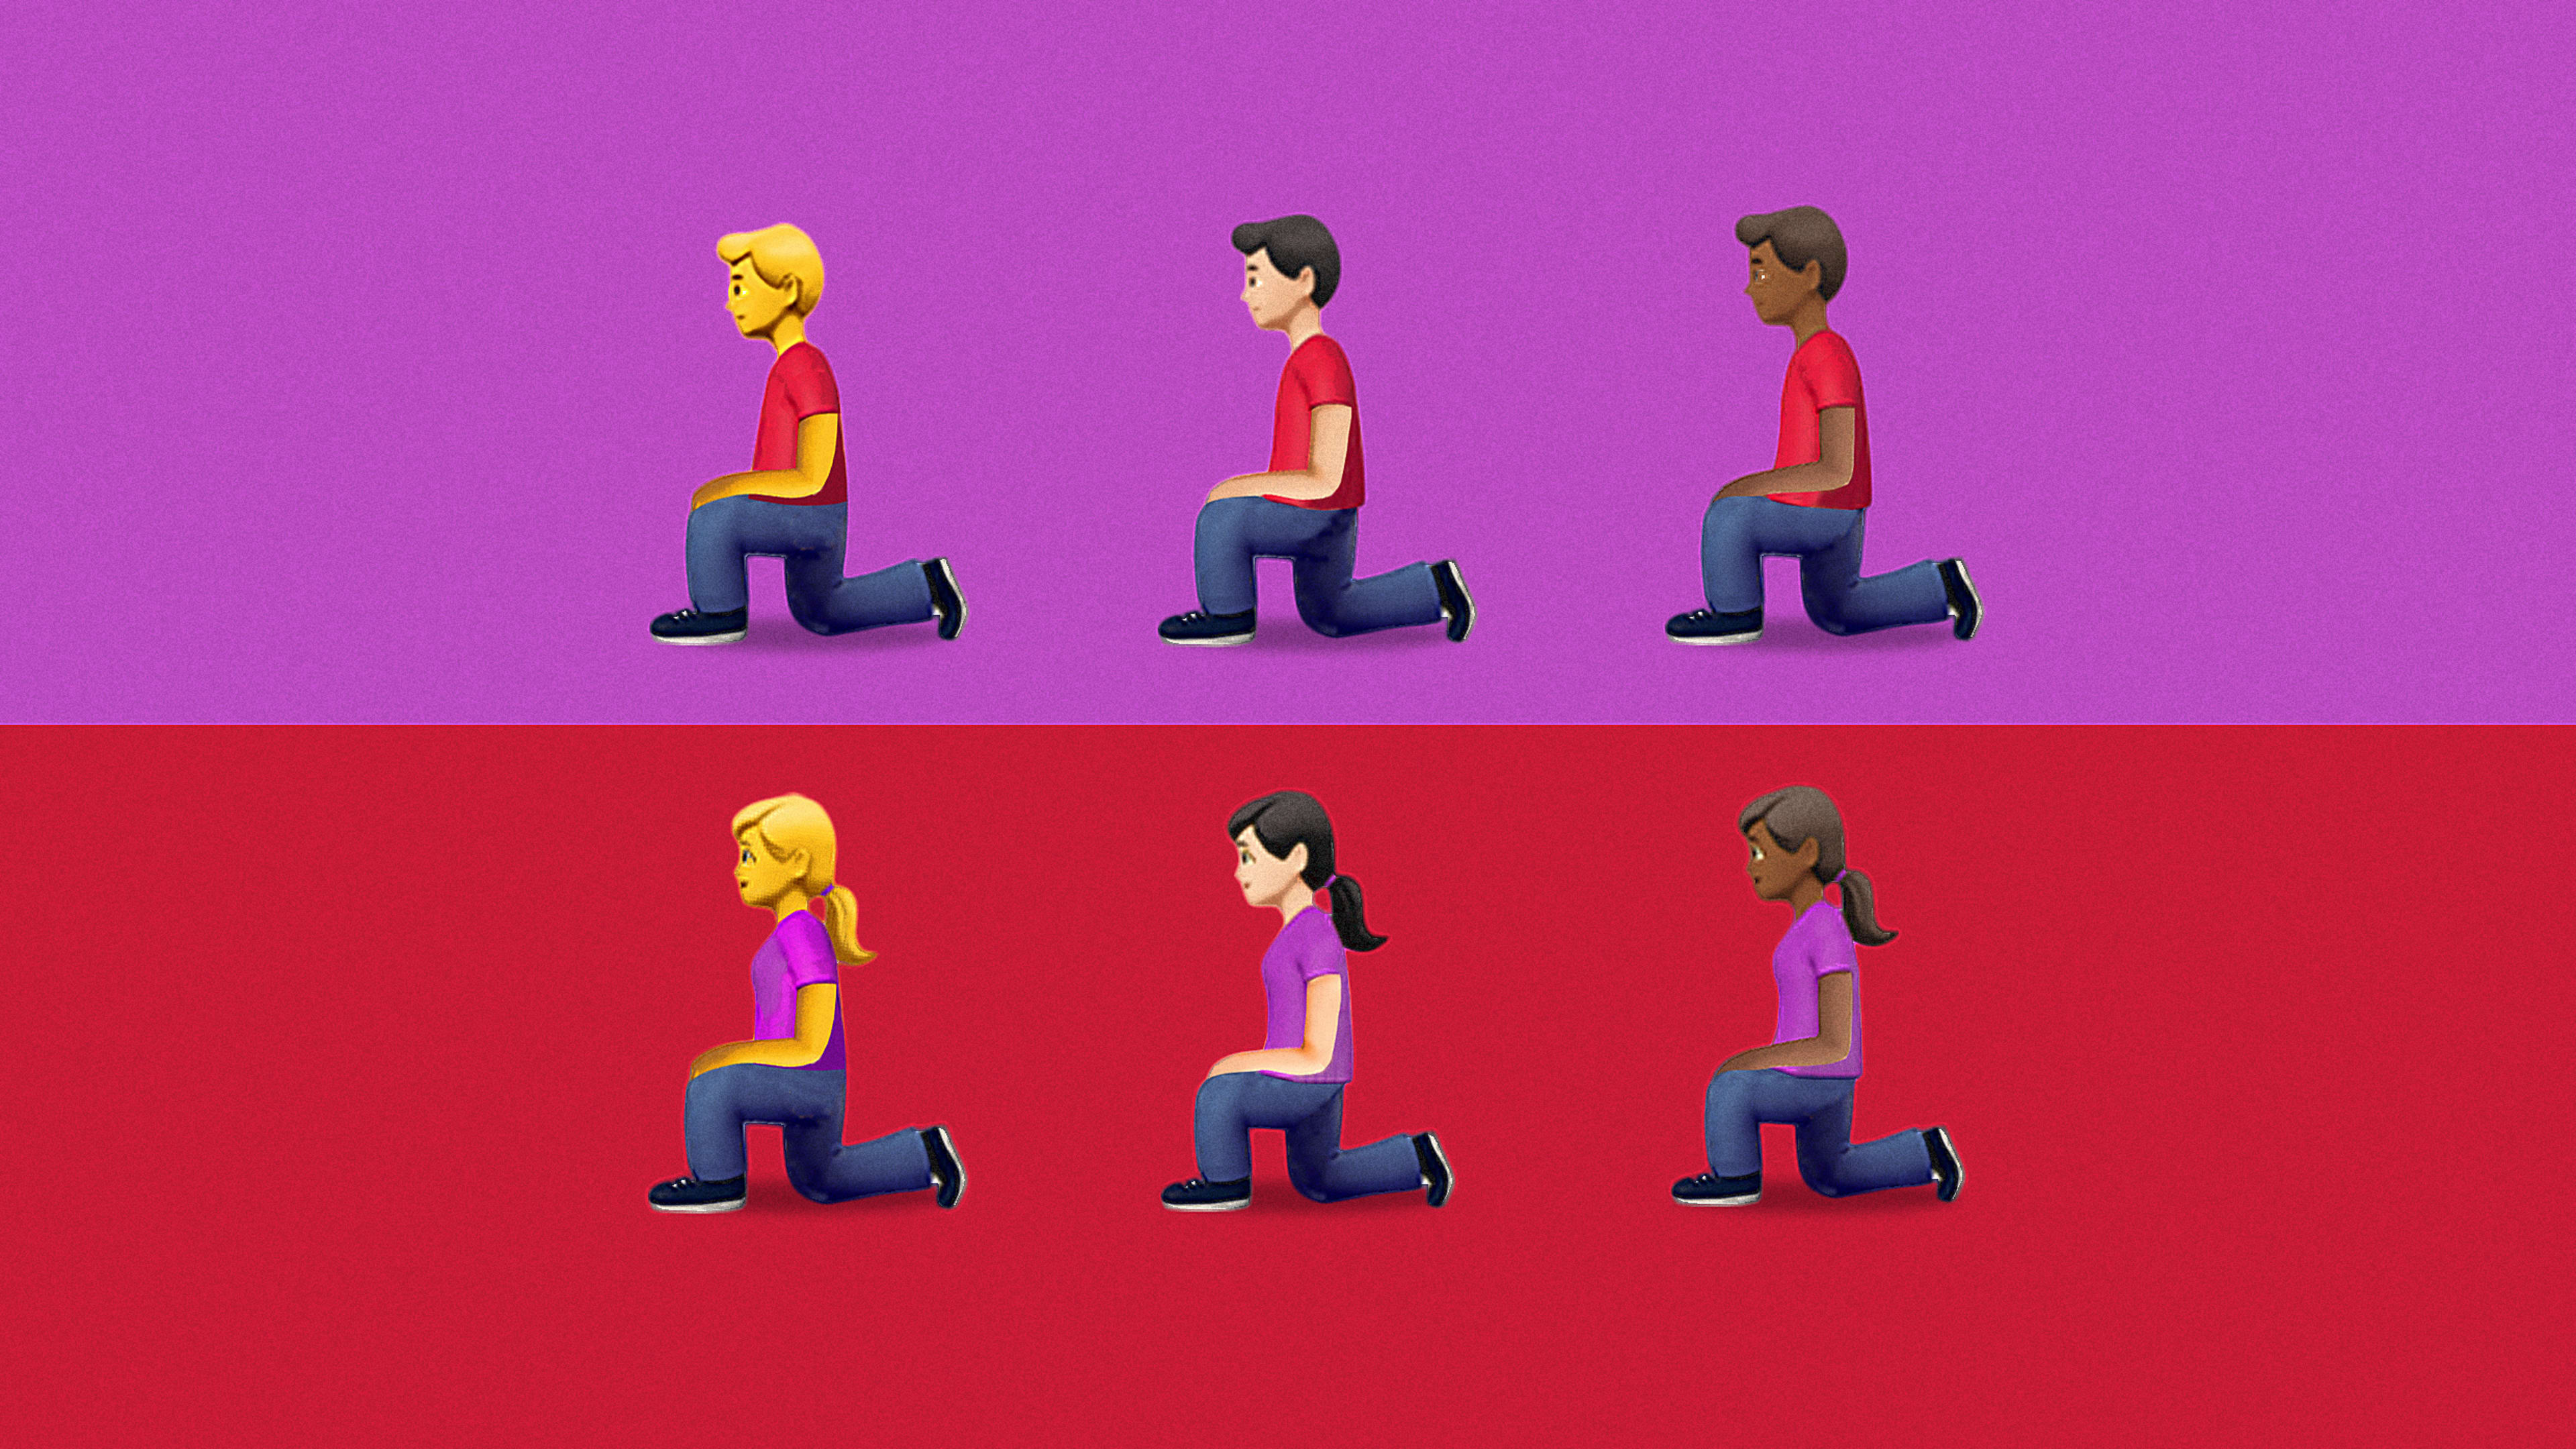 Unicode got a proposal for a kneeling-in-protest emoji two years ago. So where is it?